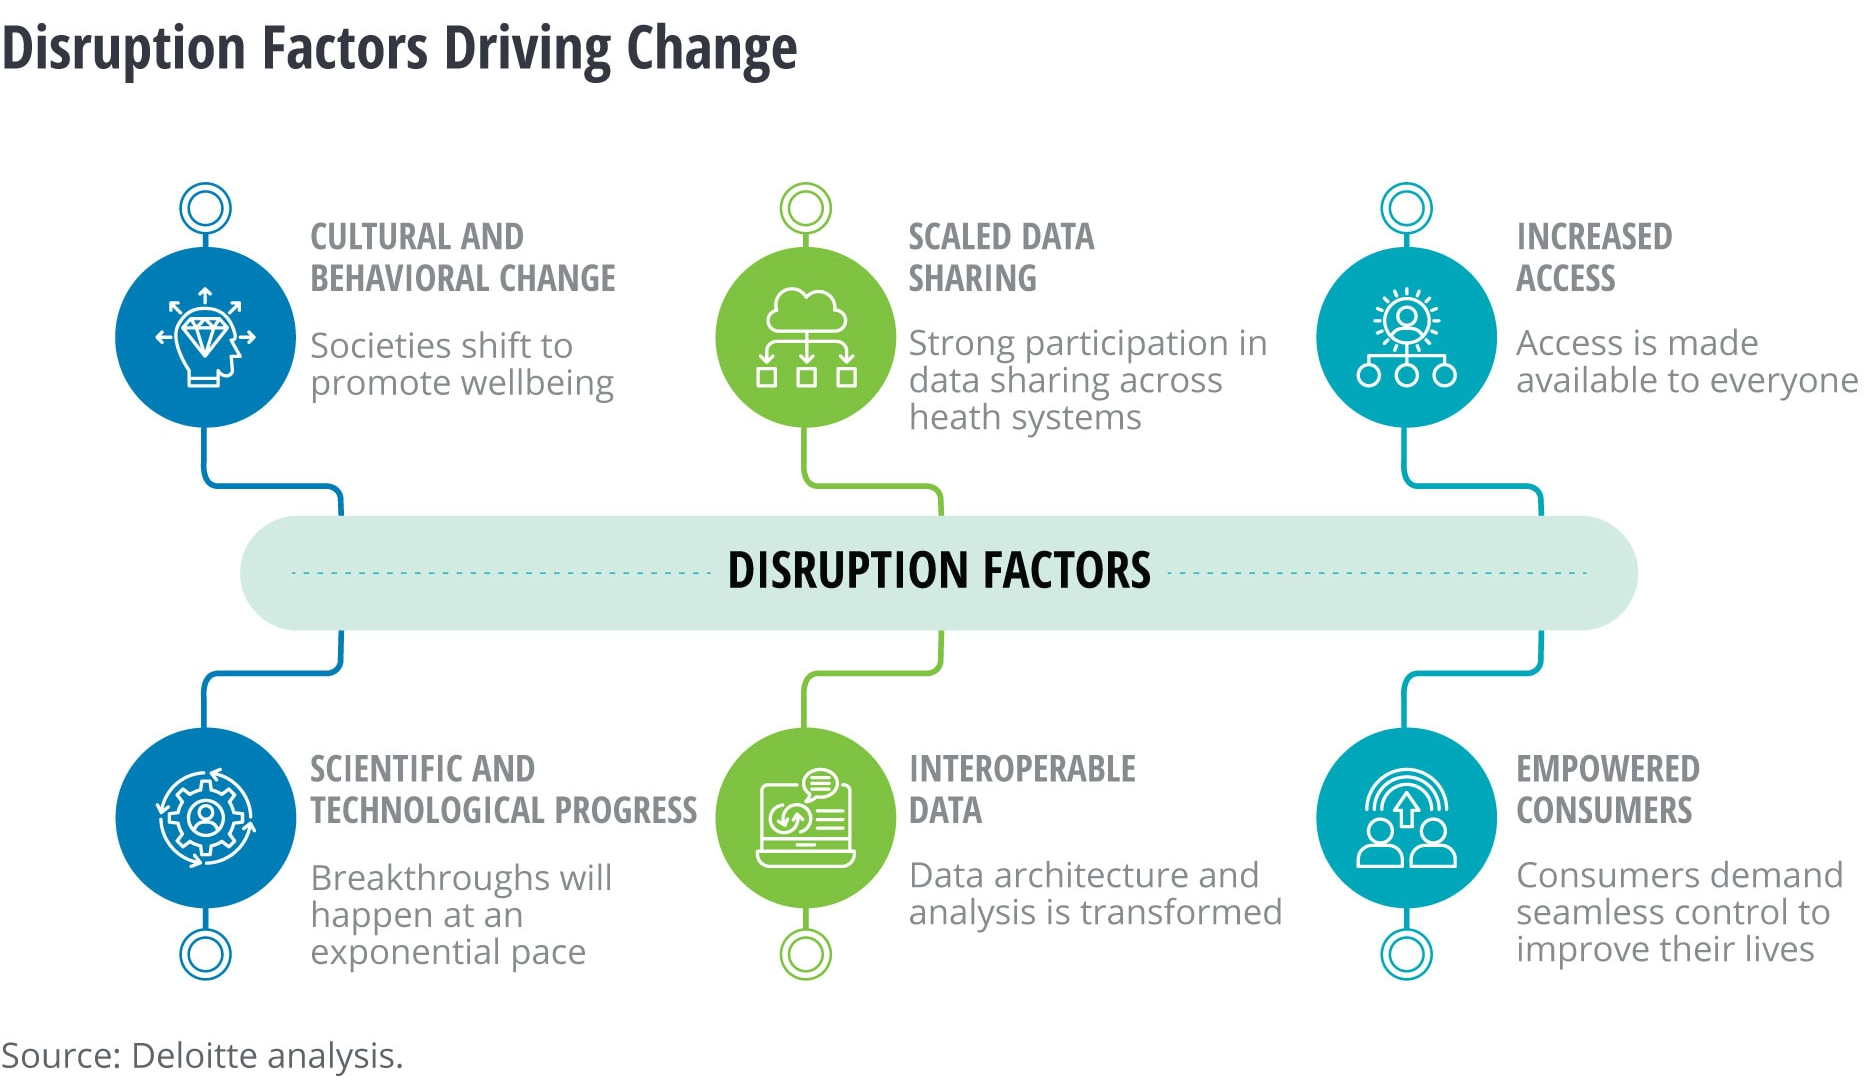 Disruption Factors image from Deloitte Insights